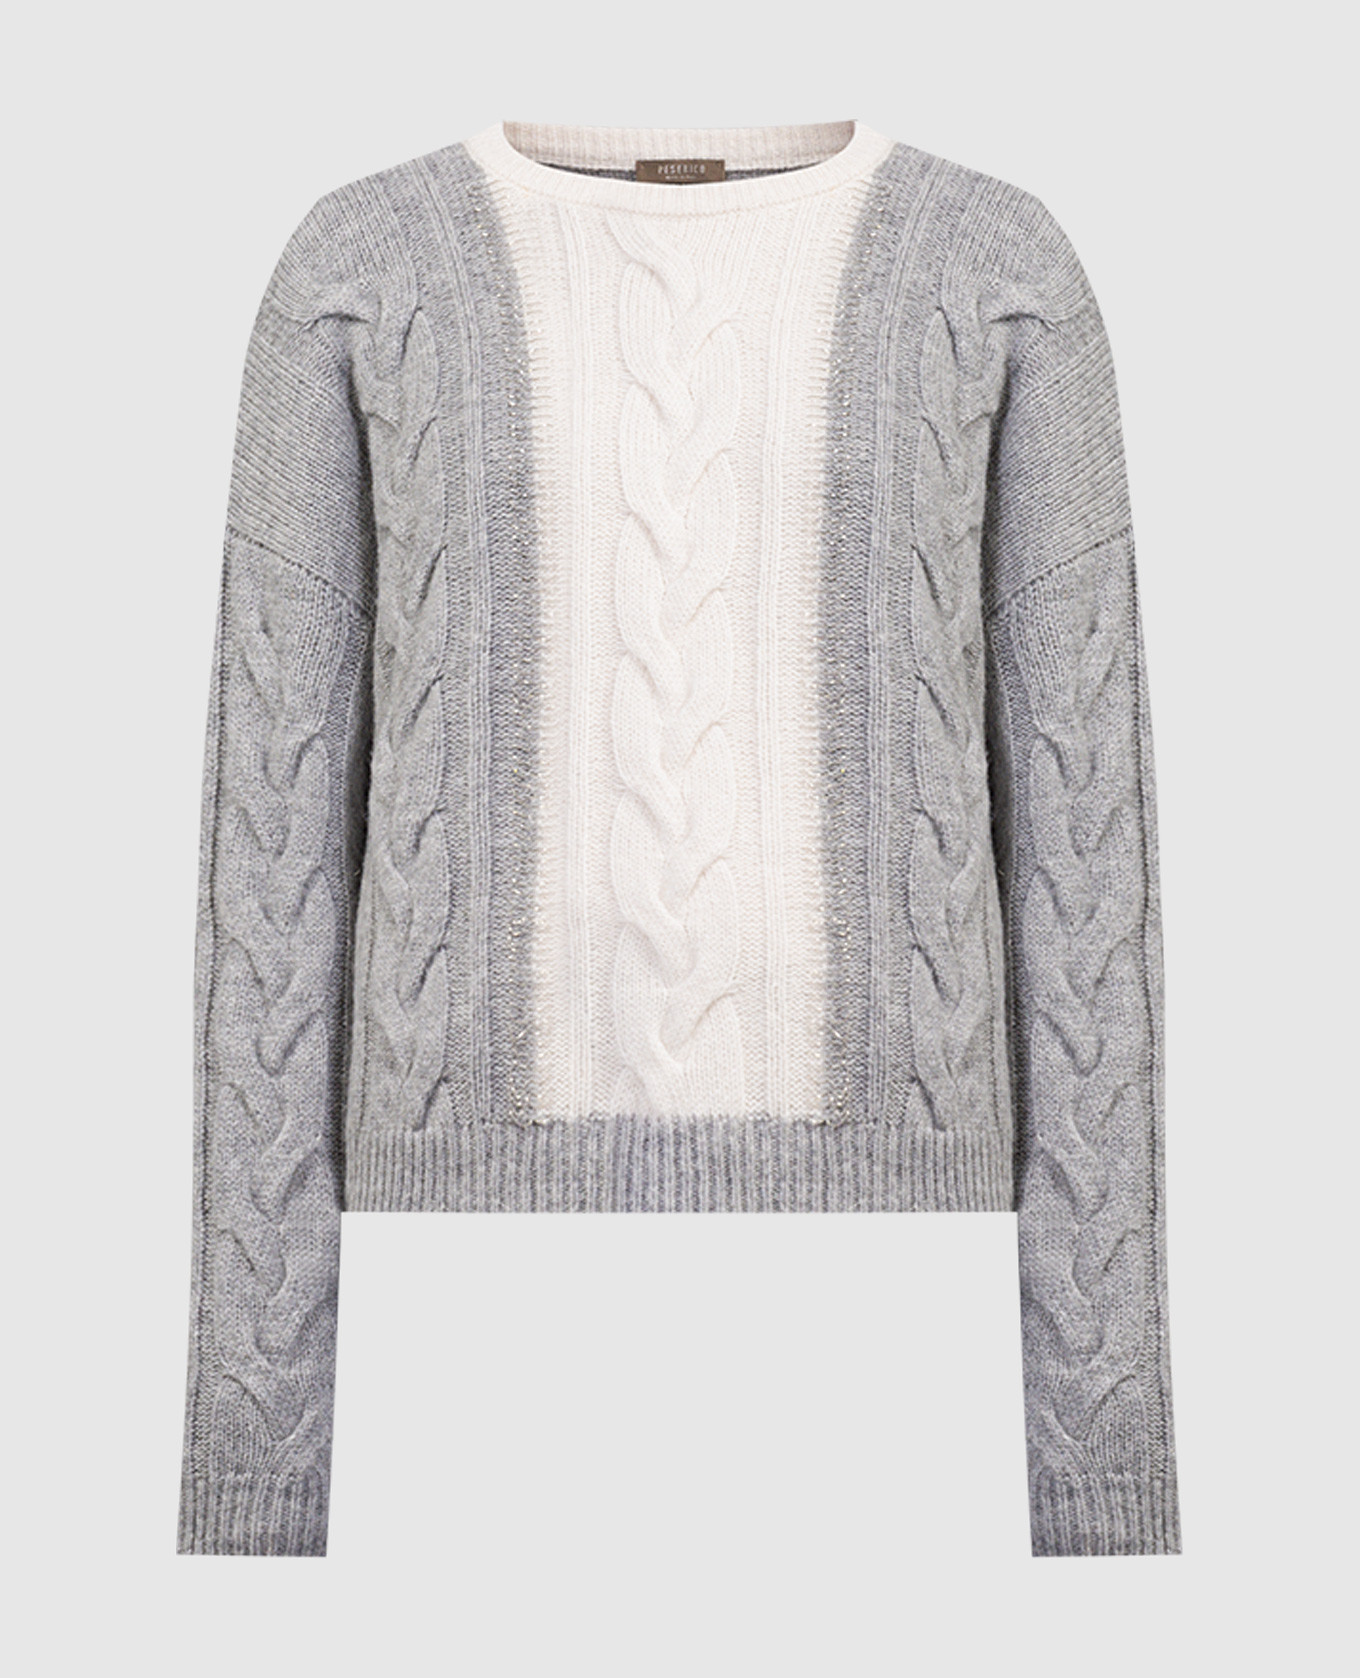 Gray sweater made of wool, silk and cashmere with a textured pattern